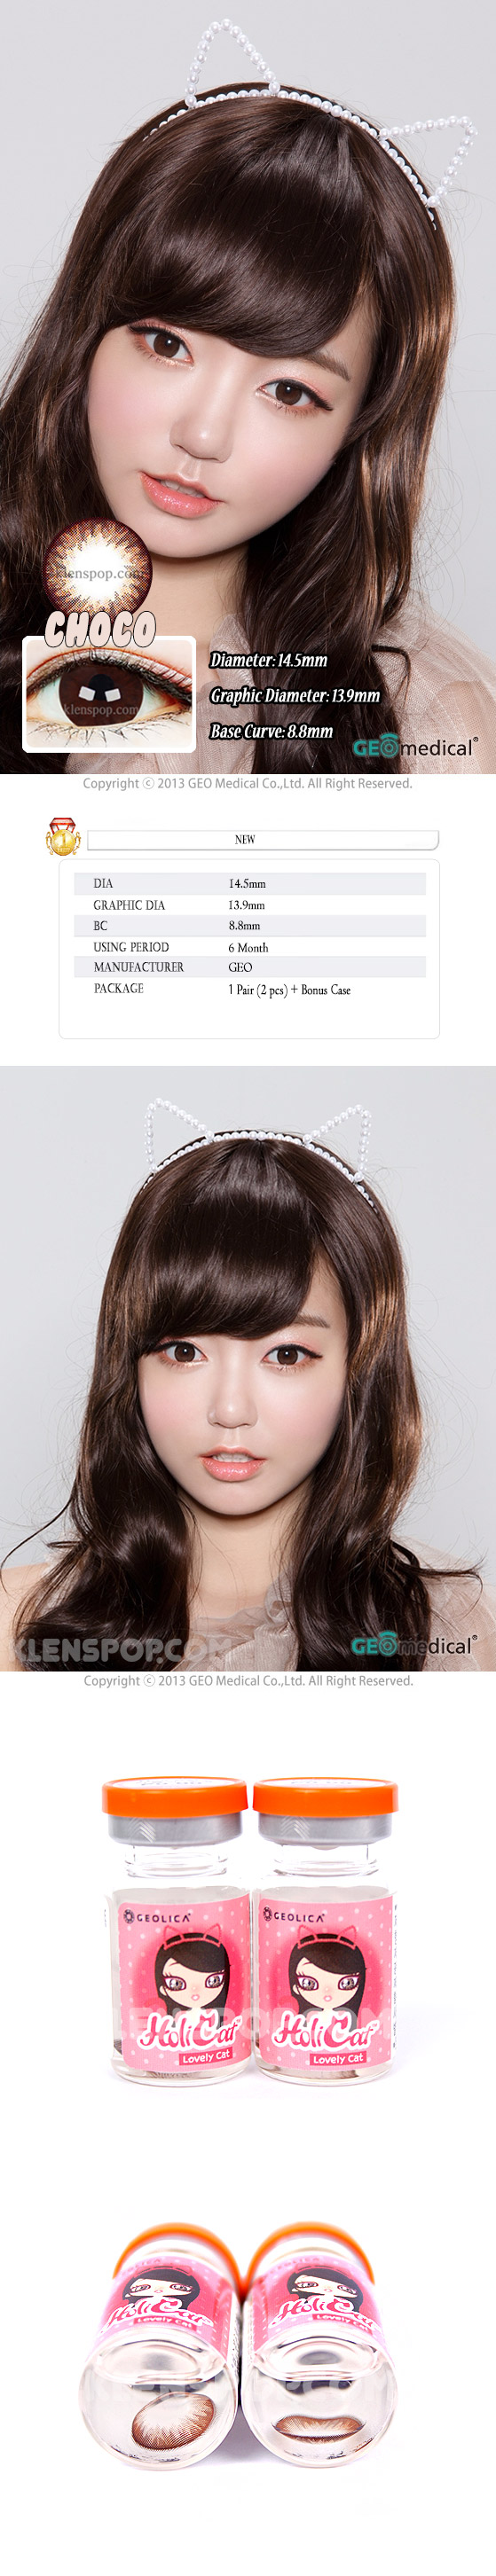 Description Imges of Geo Holicat Lovely Choco Prescription Colored Contacts